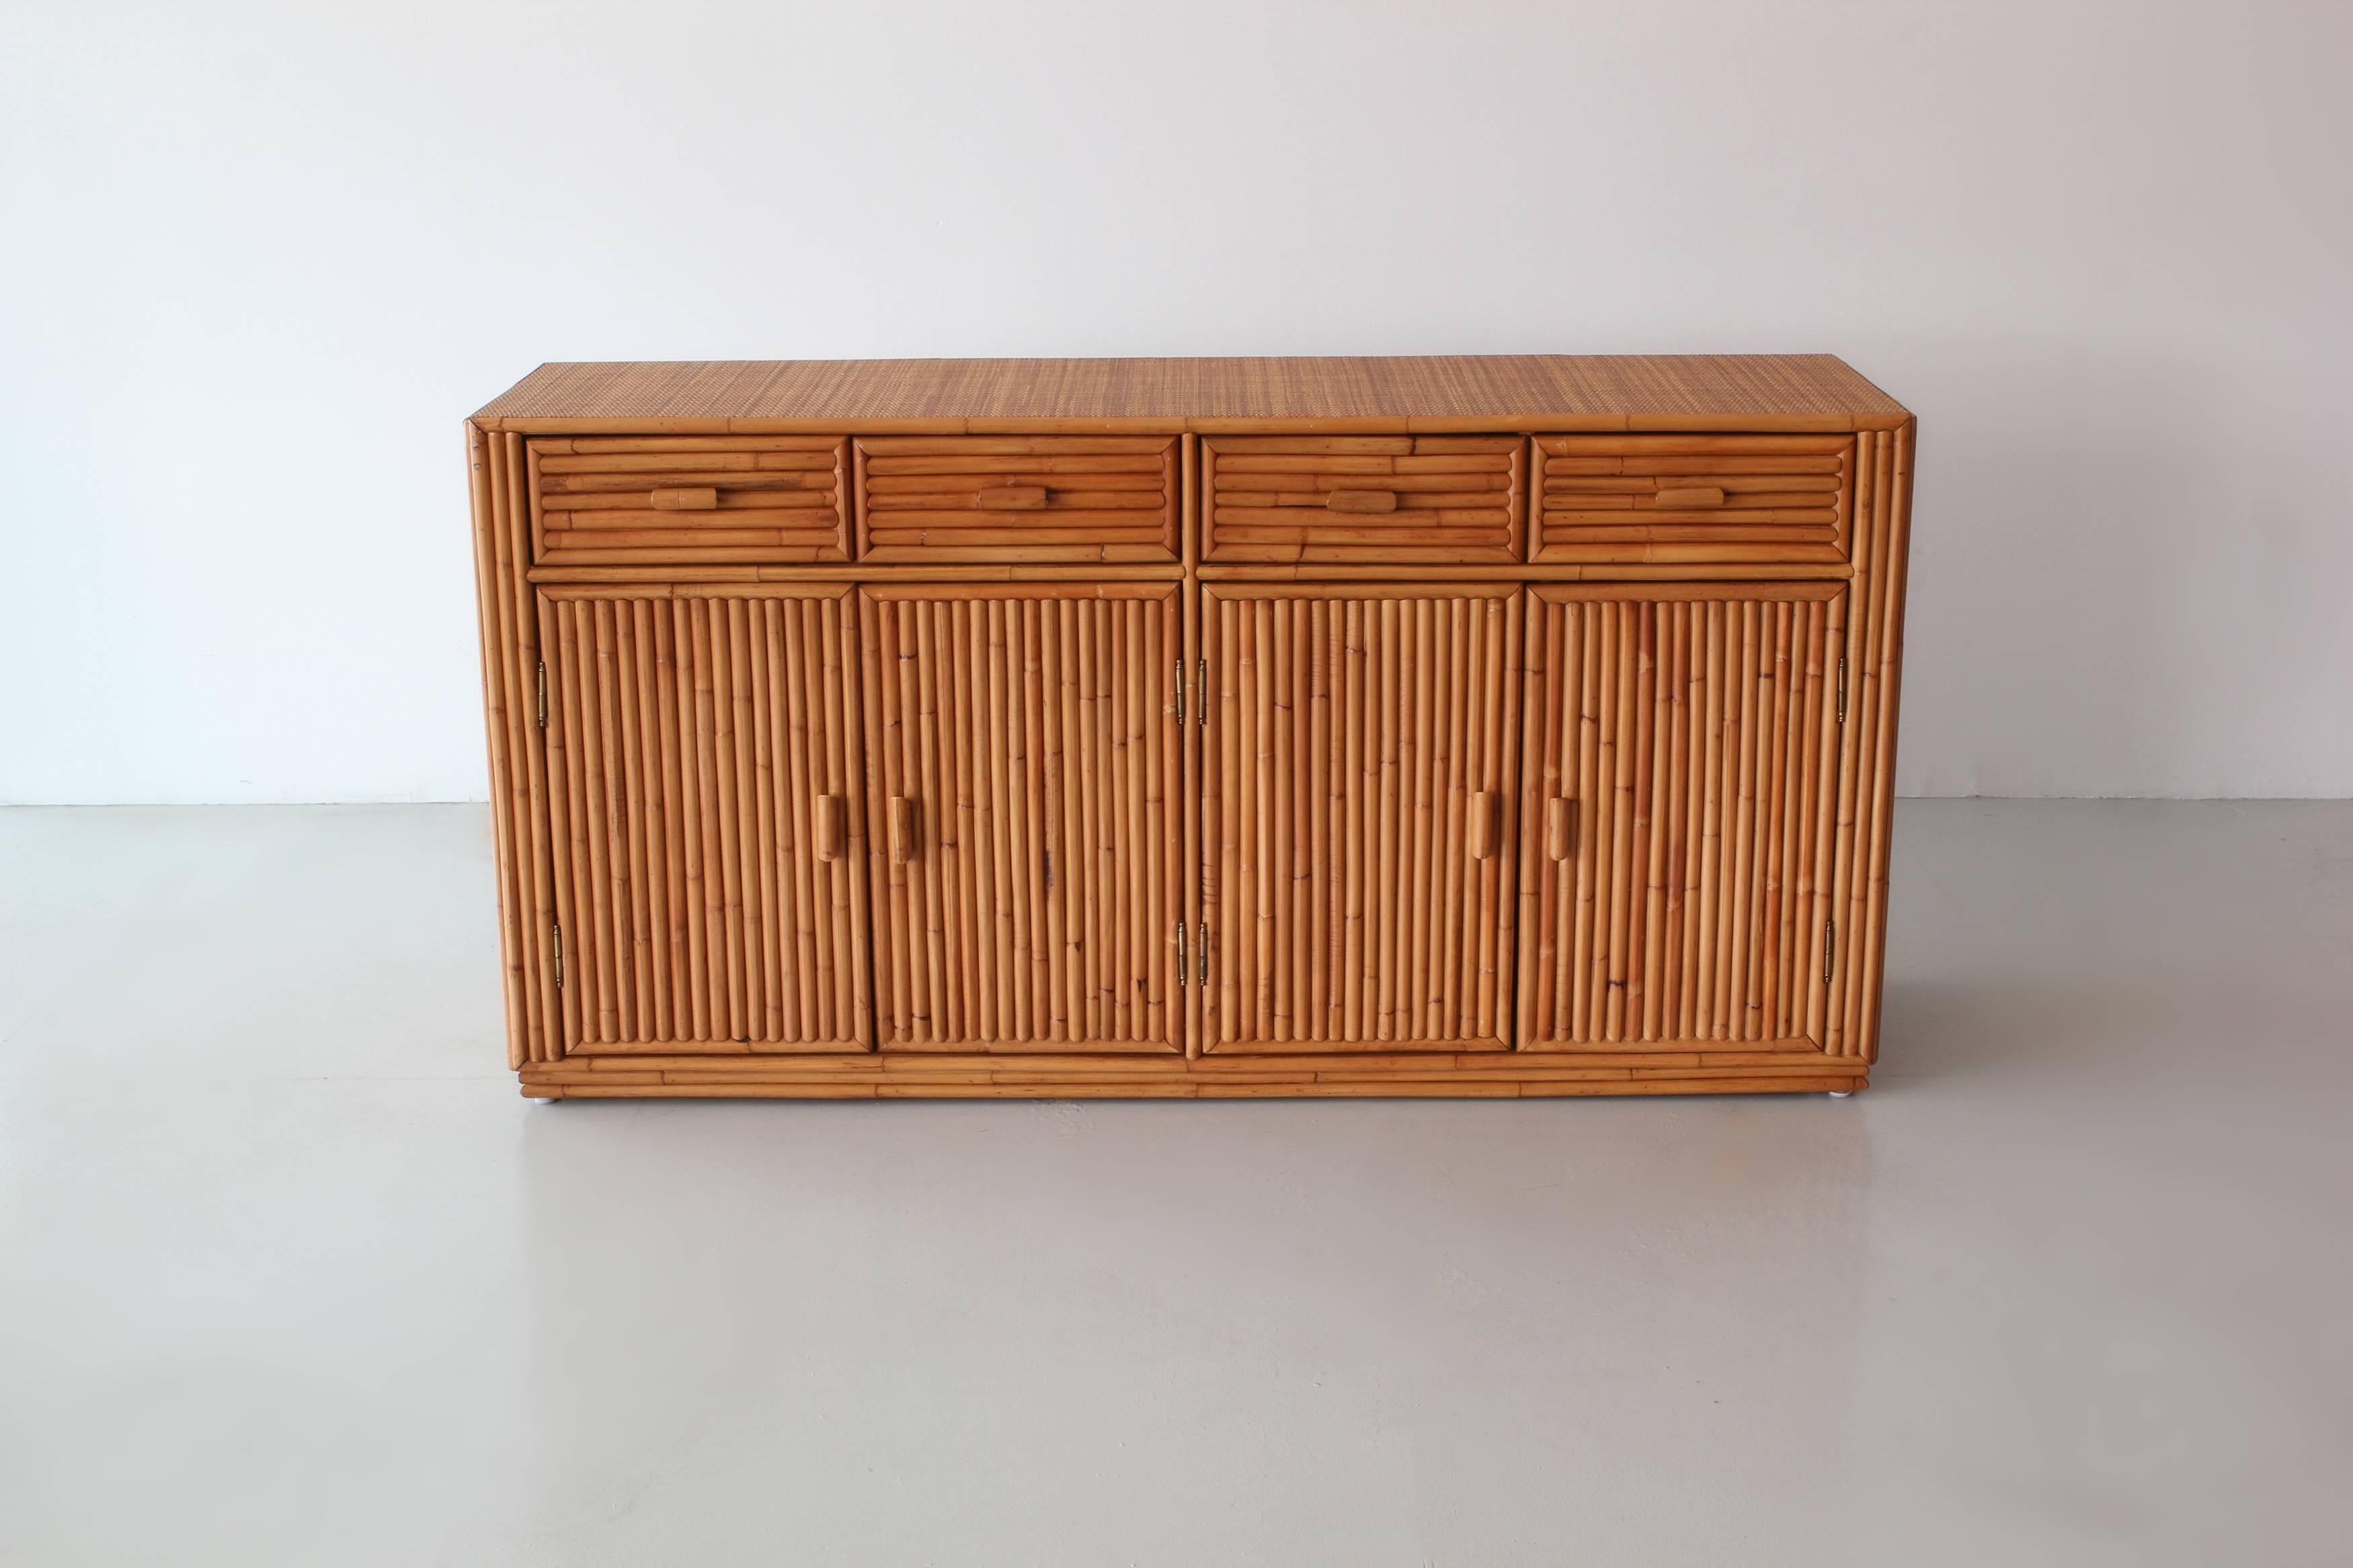 Rattan cabinet wonderfully constructed with four drawers and open shelving.